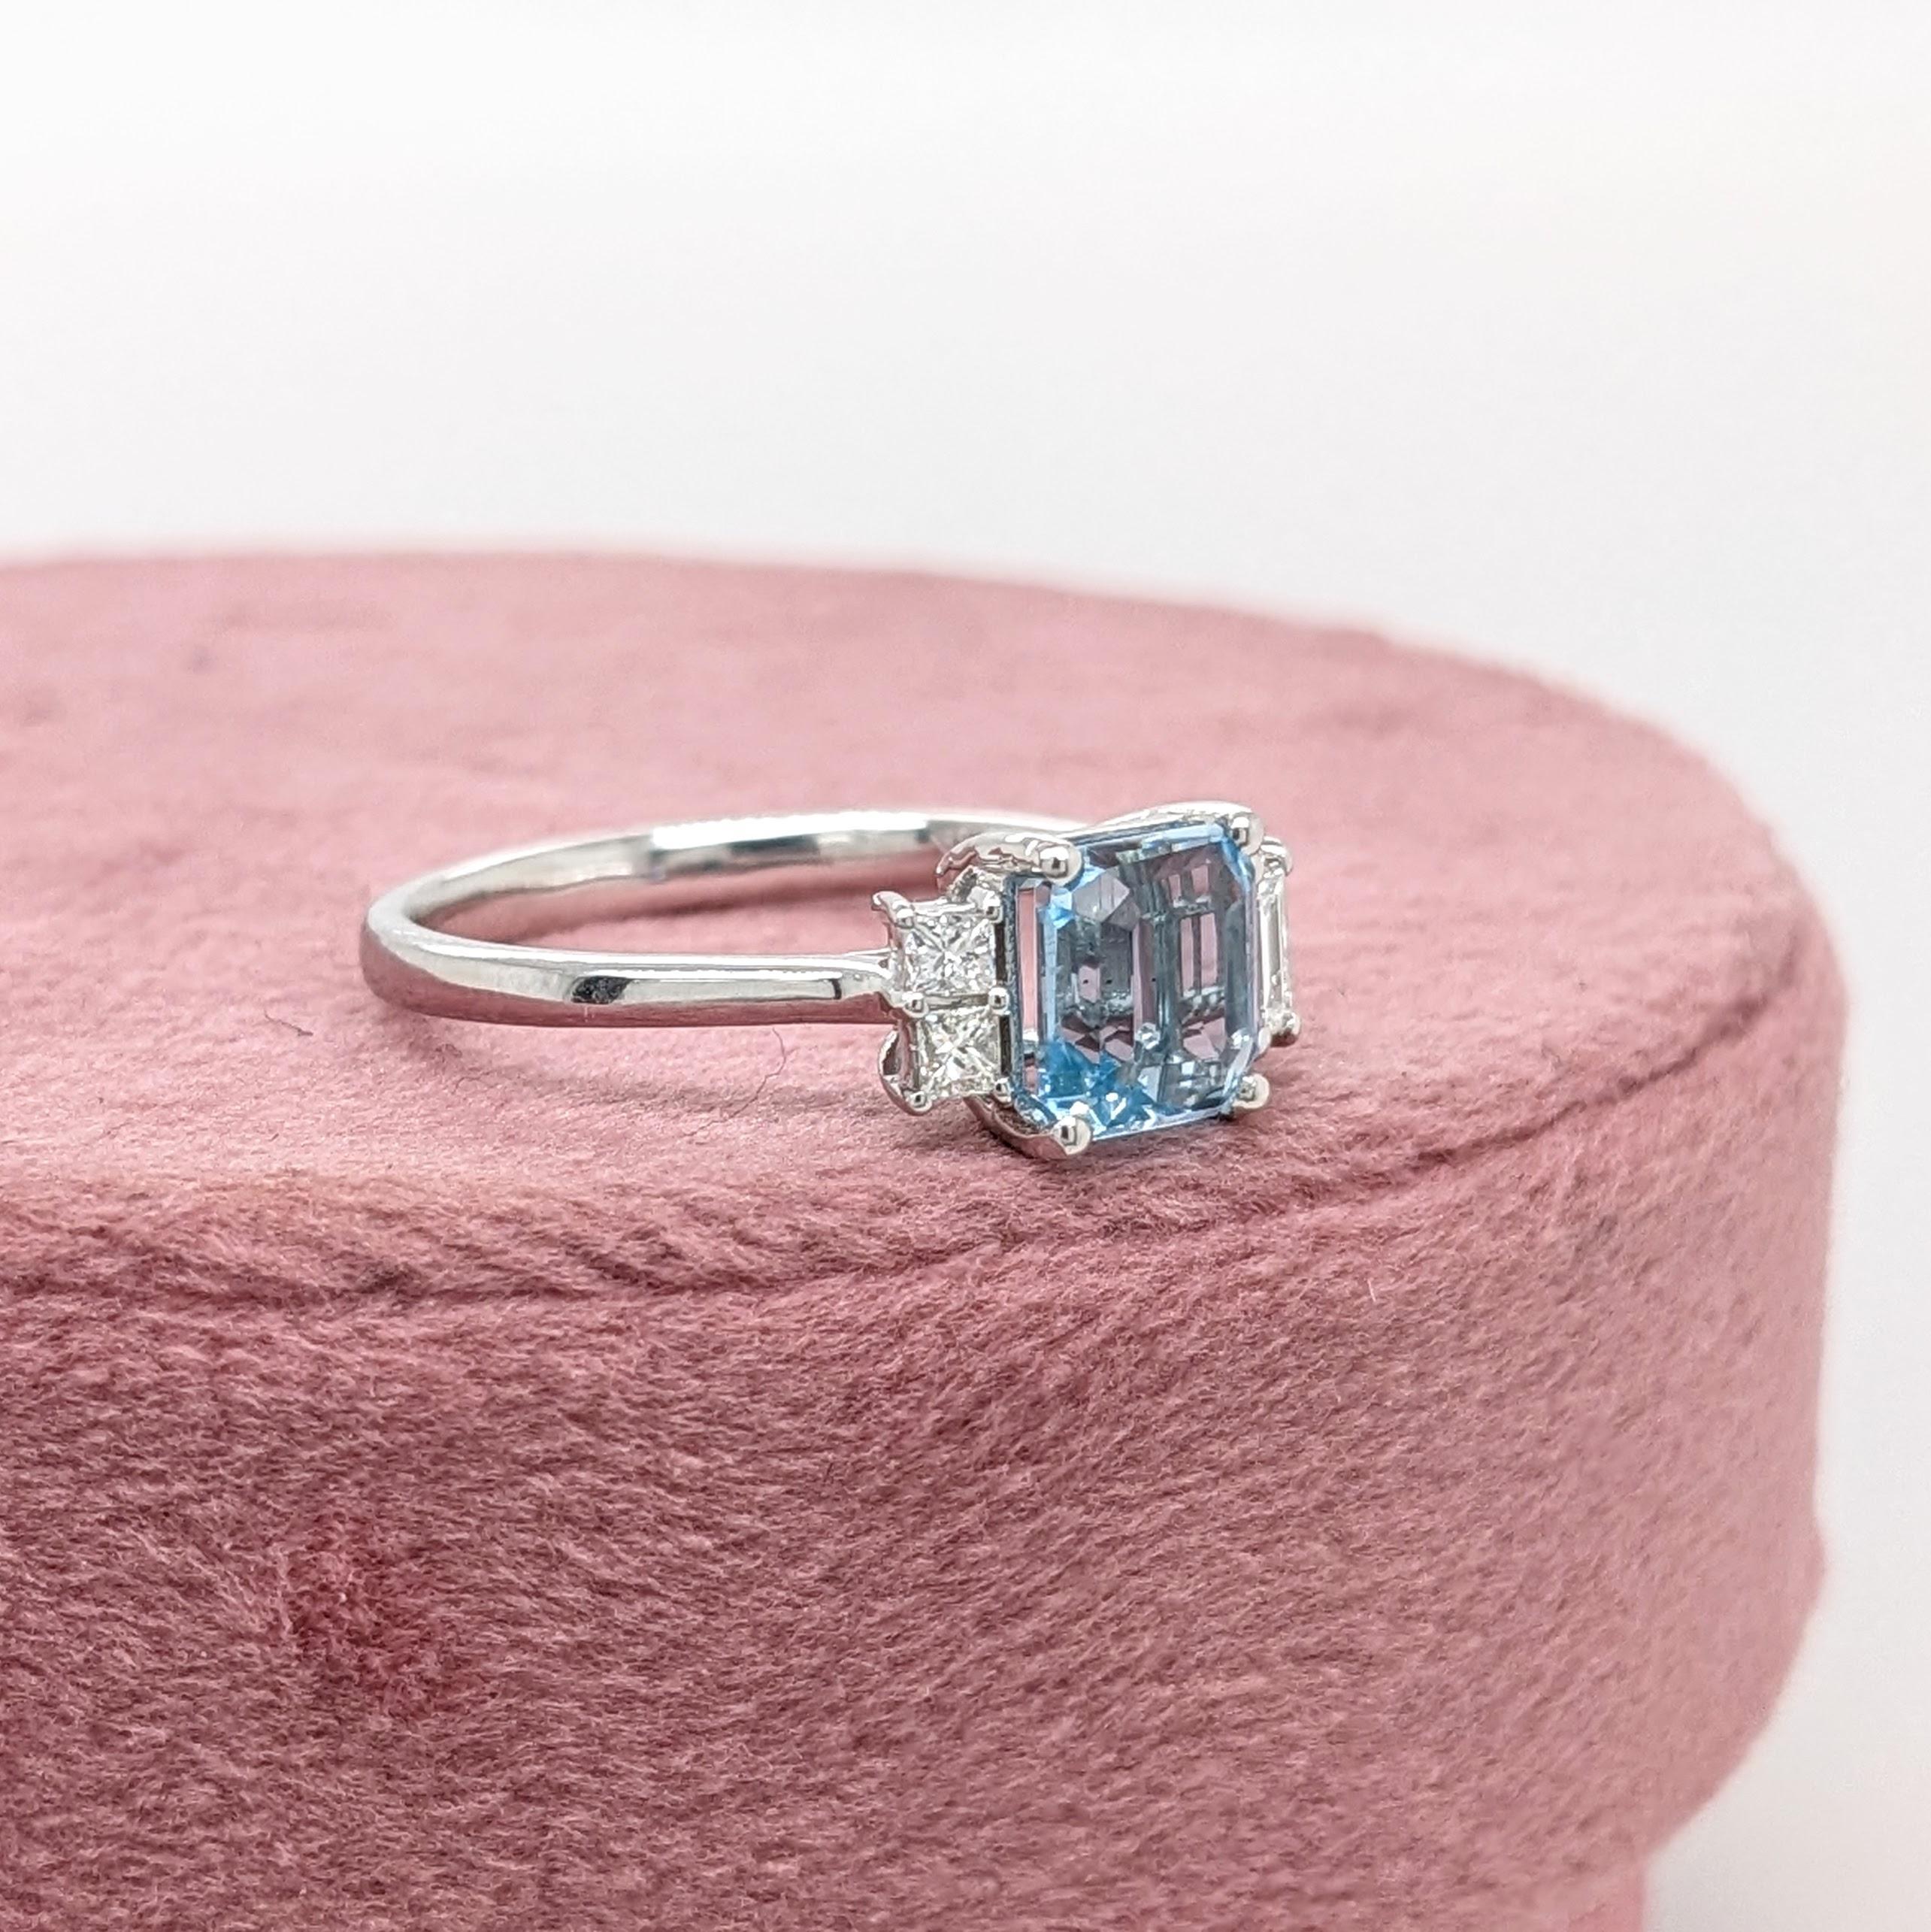 1ct Aquamarine Ring w Earth Mined Diamond in Solid 14K White Gold EM 6.5x5.5mm In New Condition For Sale In Columbus, OH